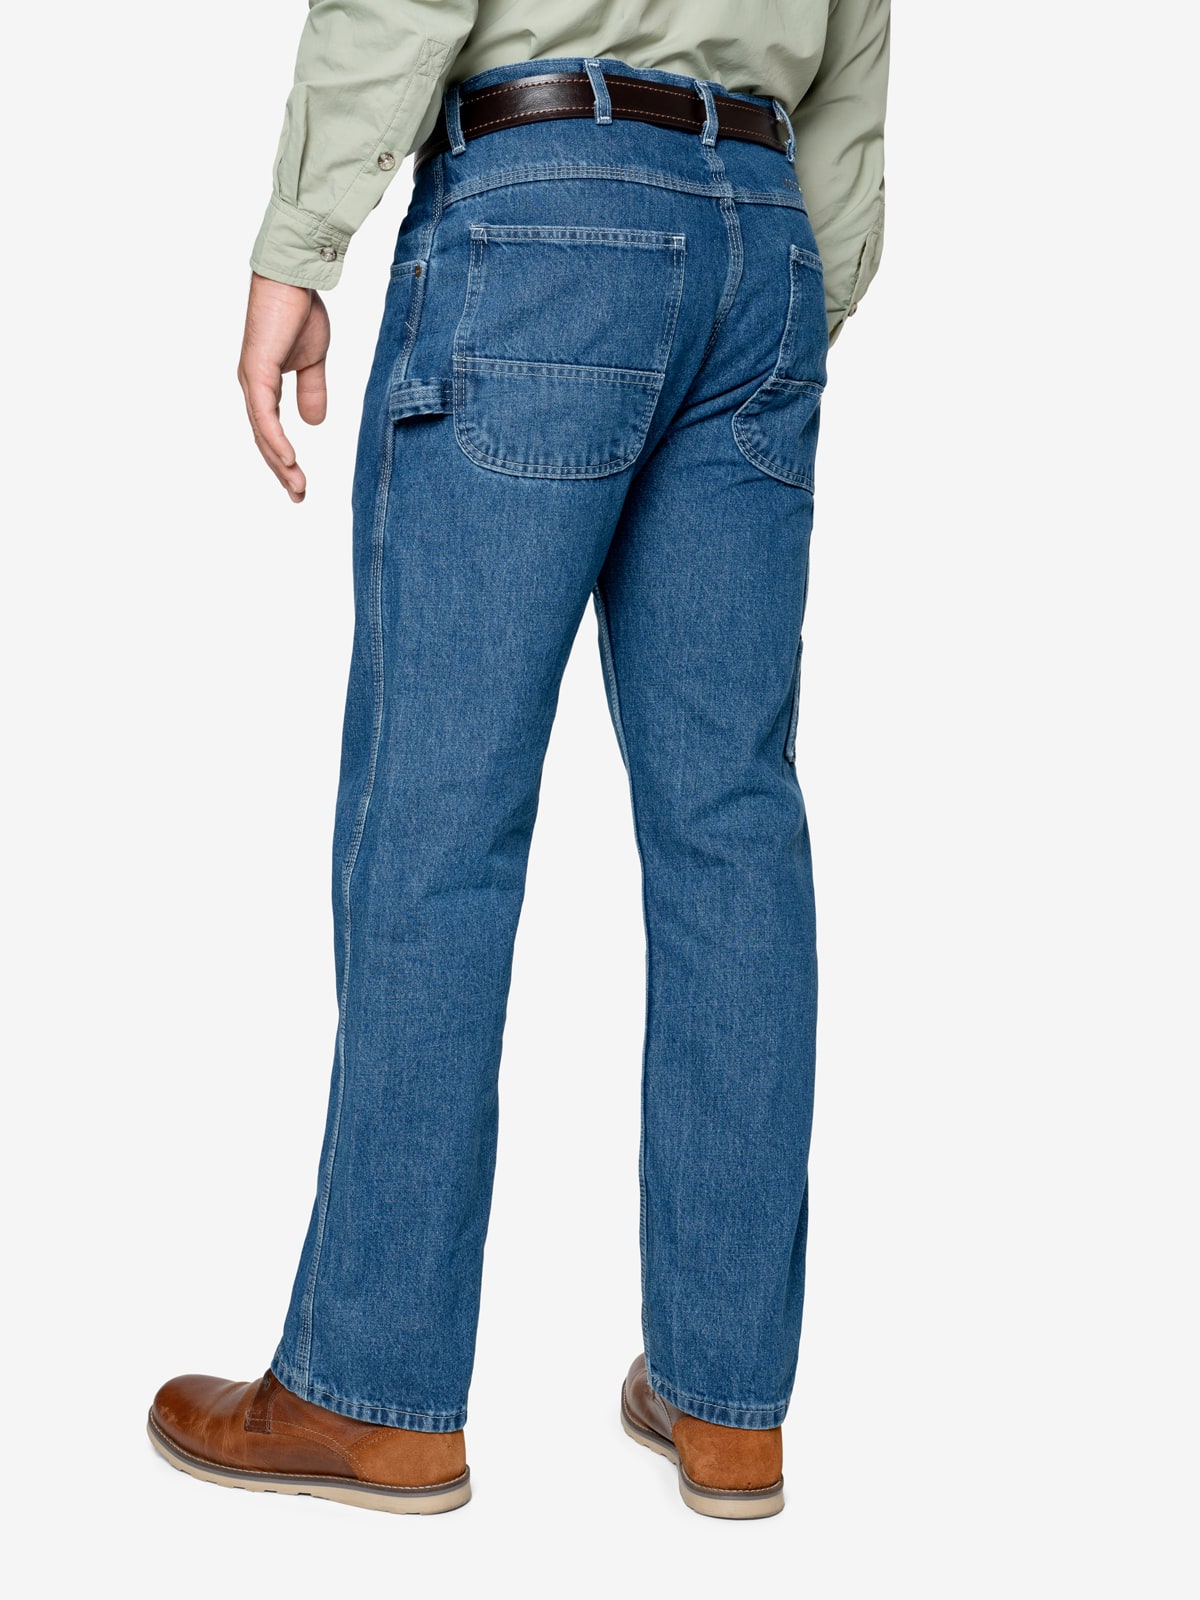 Insect Shield Men's Work Jeans